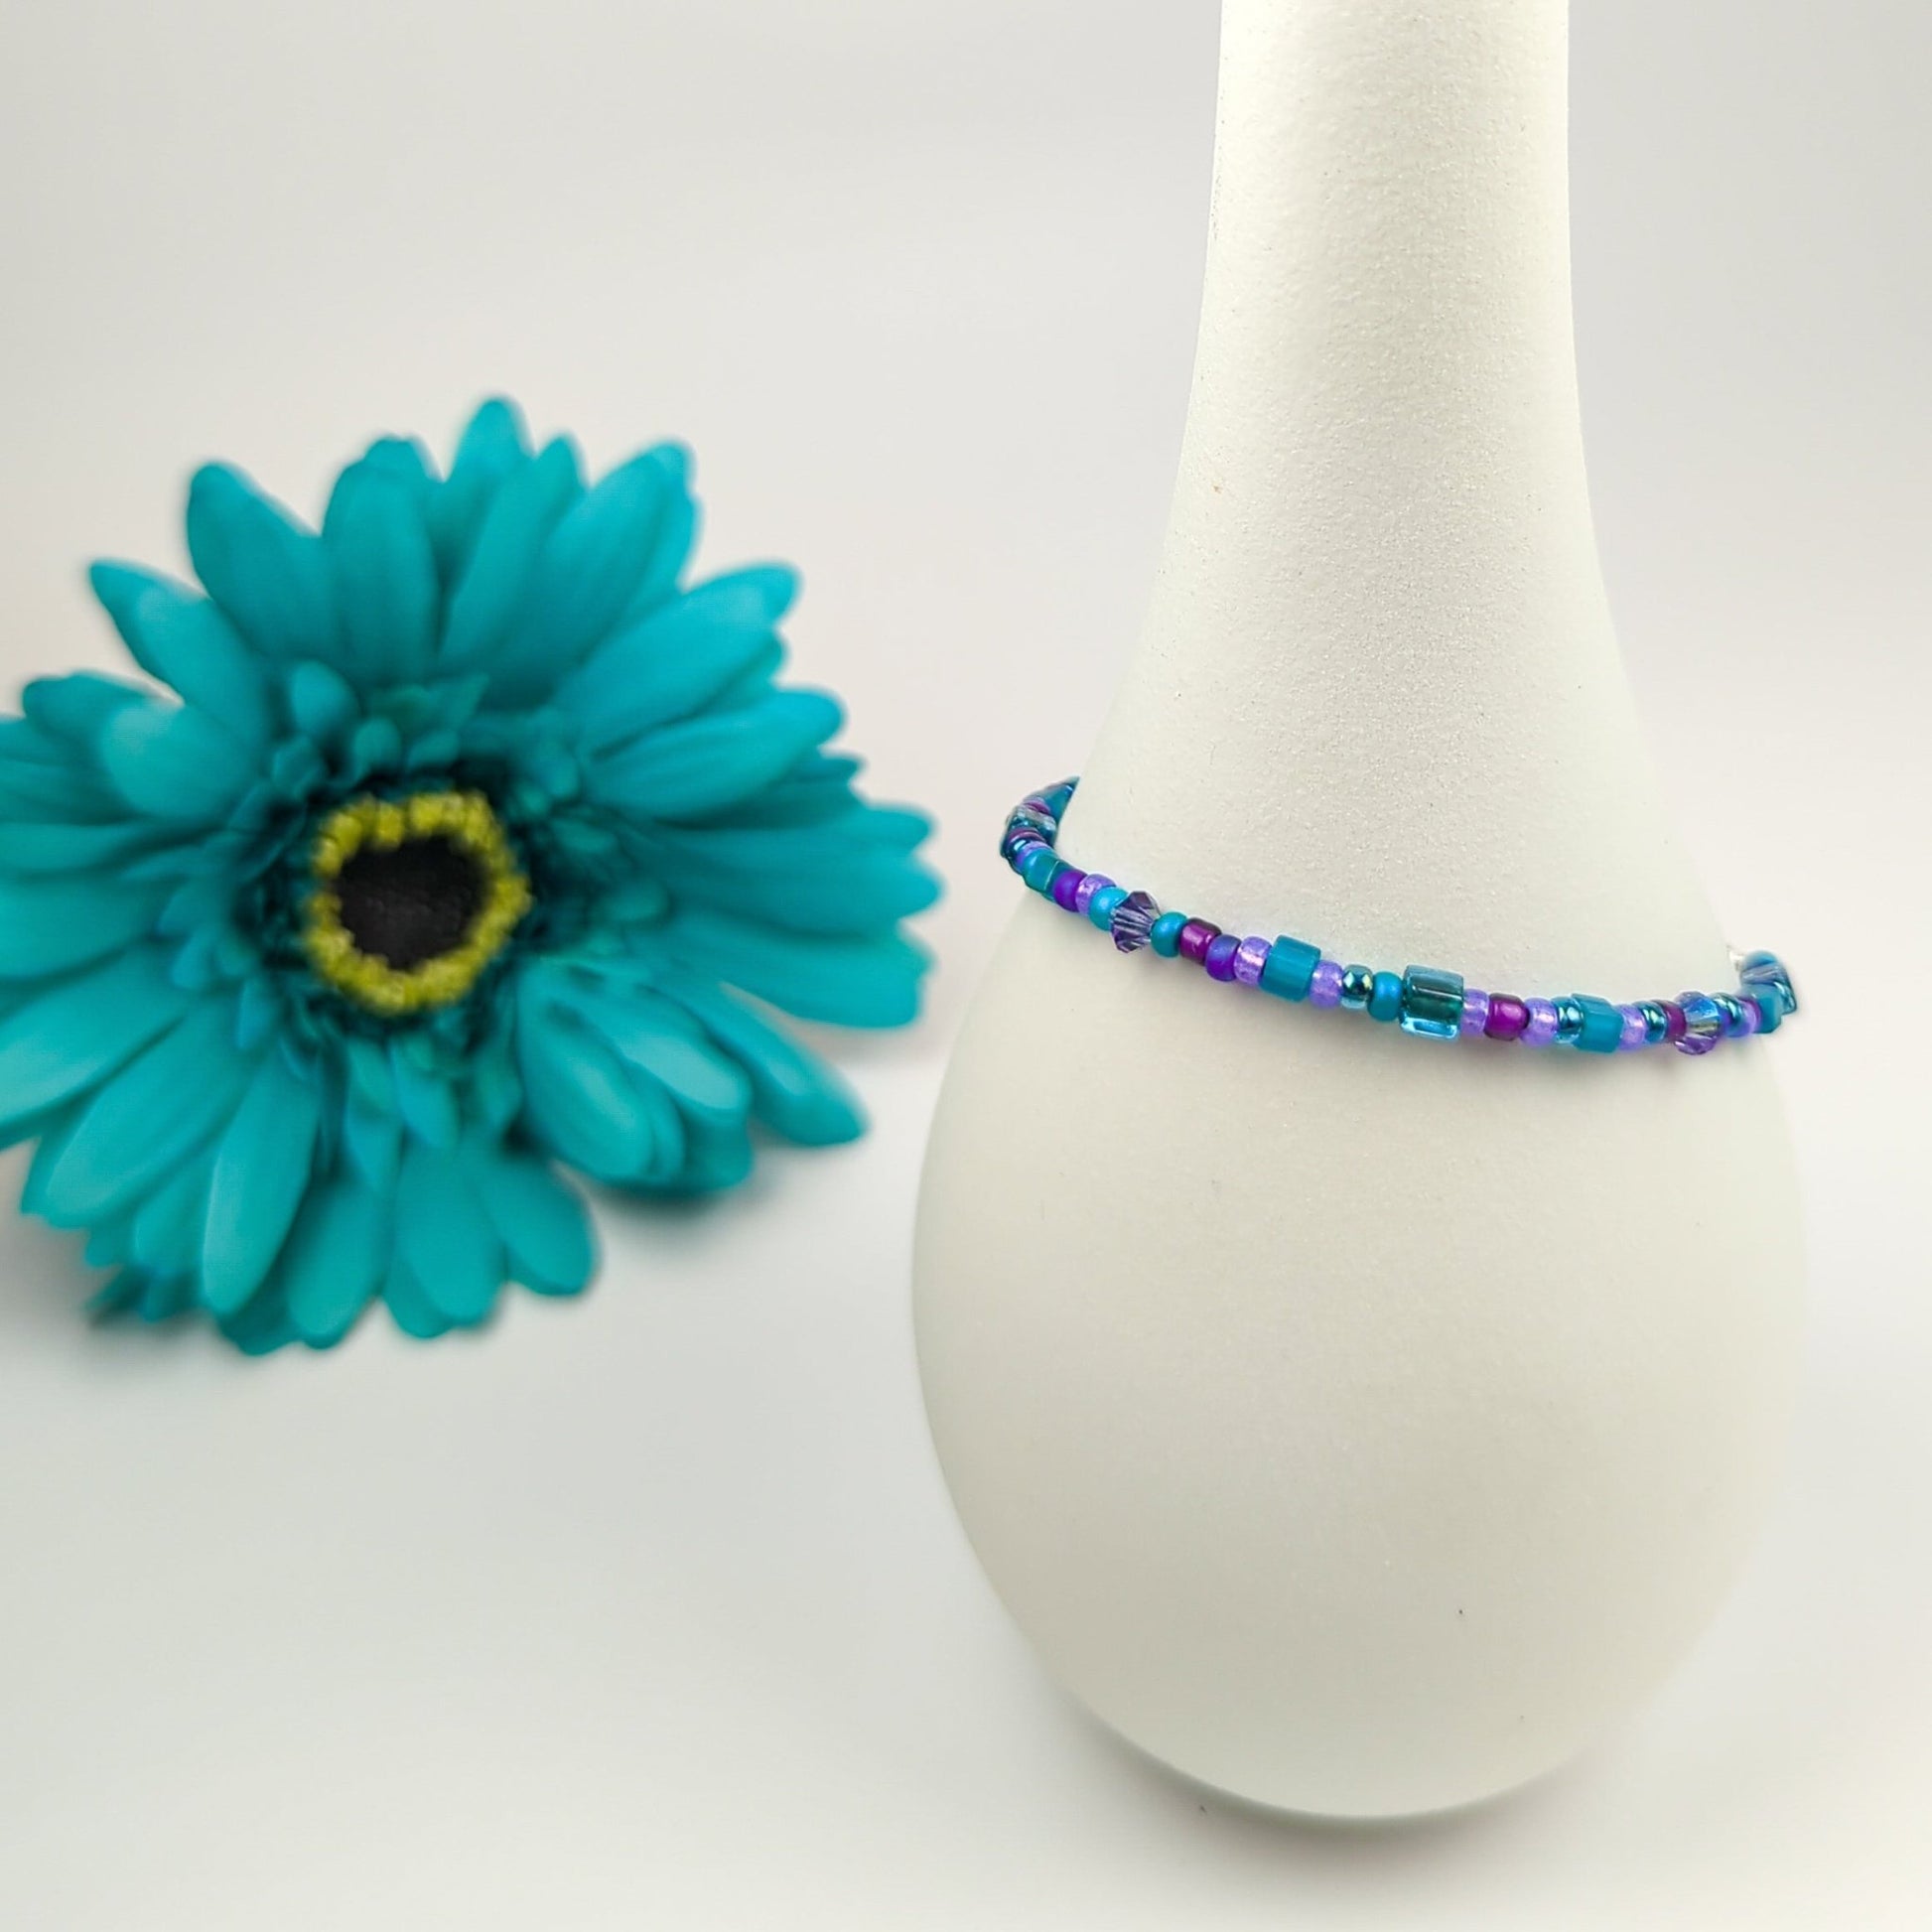 Assorted shaped glass seed beads - Purple and teal bracelet - creations by cherie